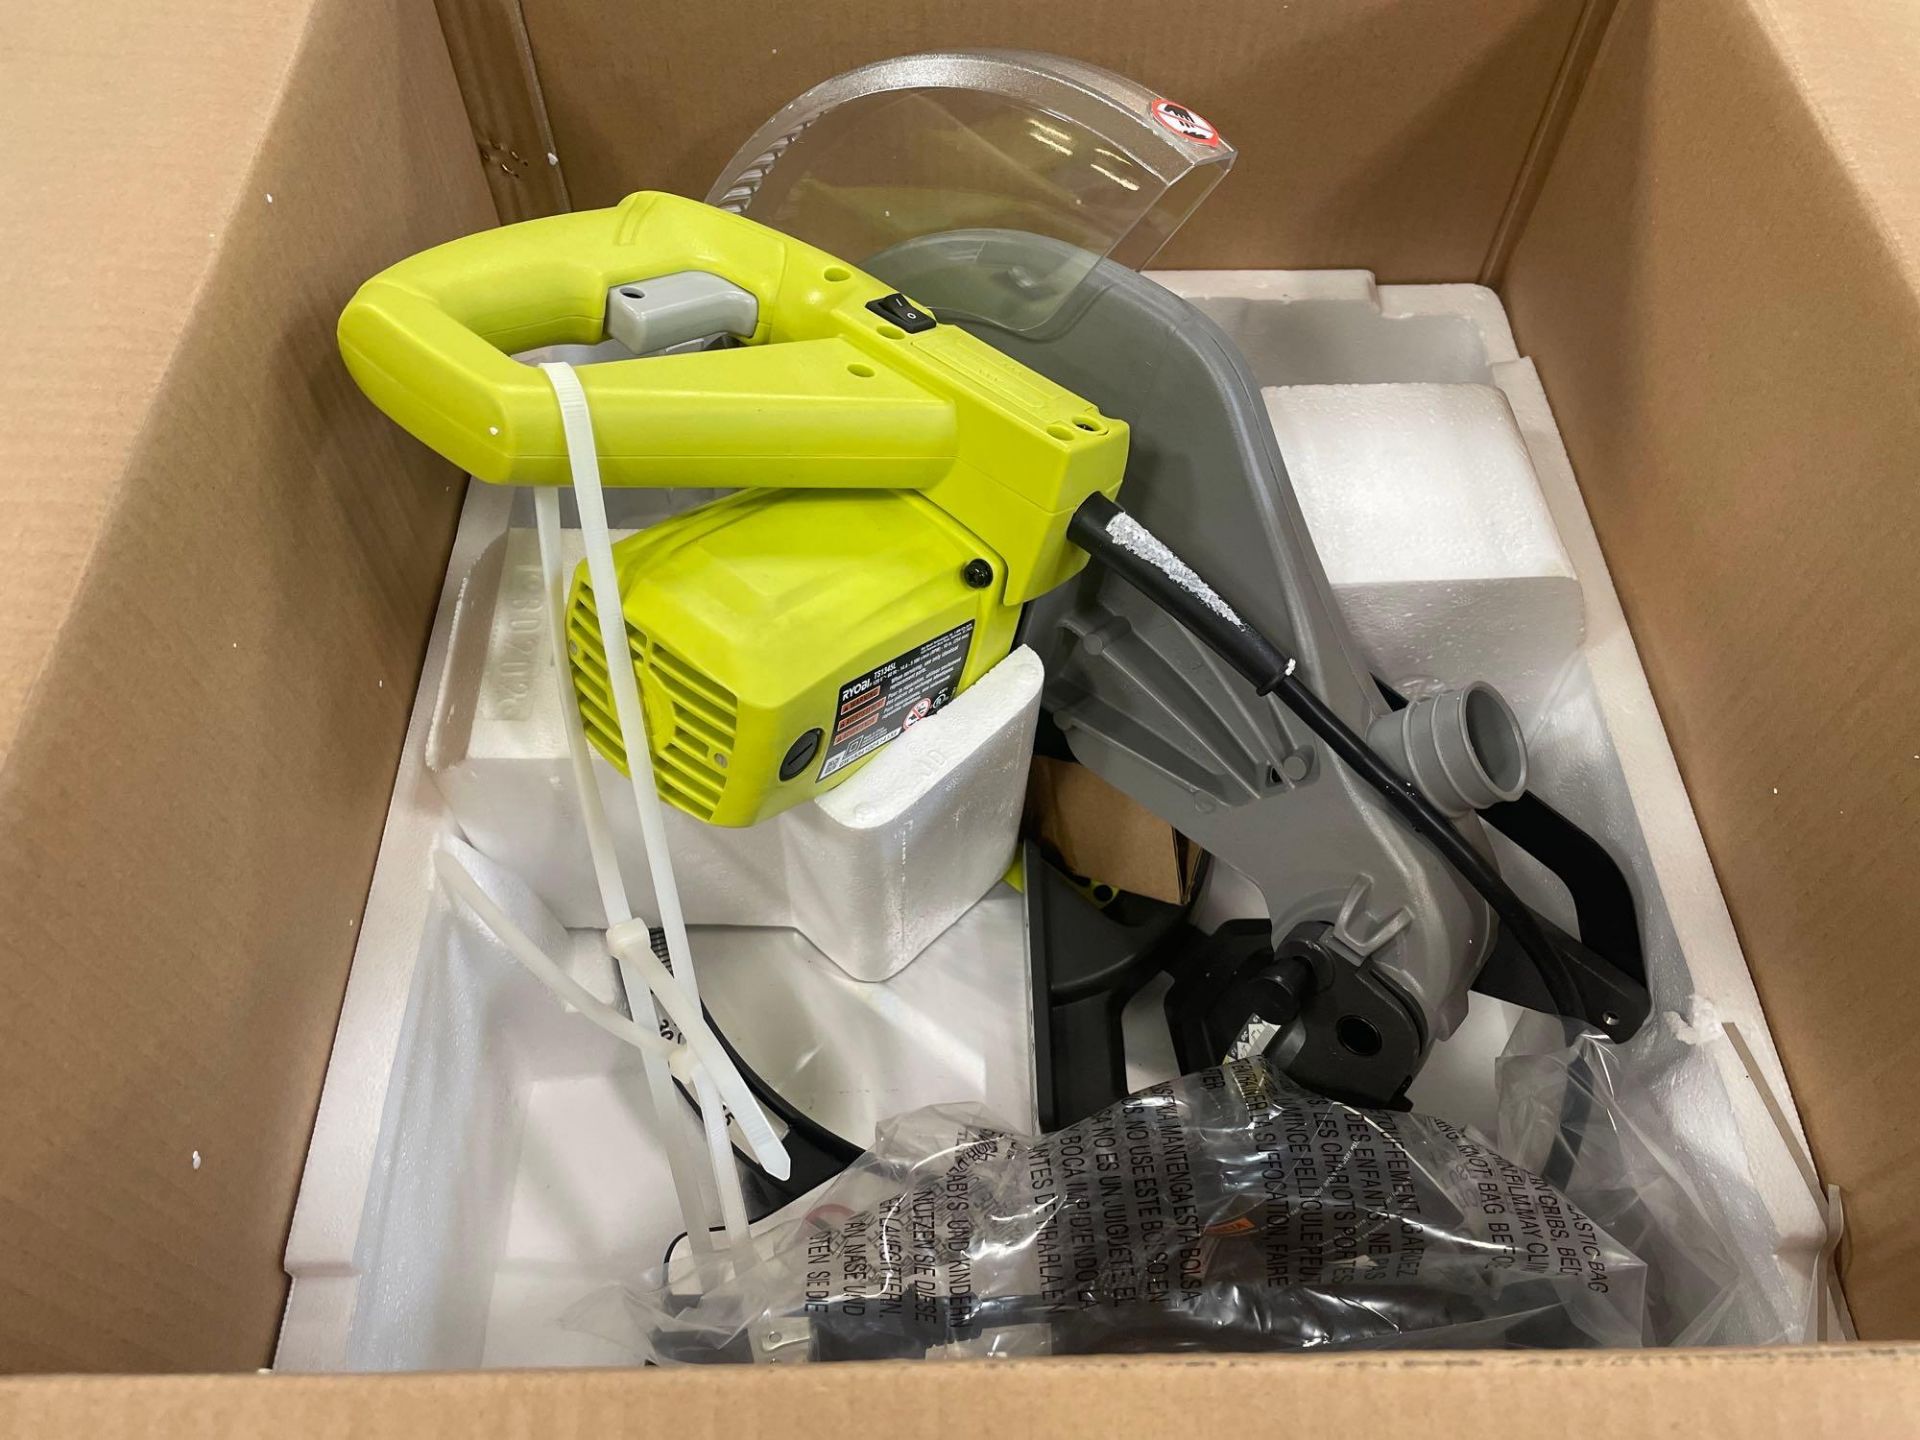 New Ryobi 10" Compound Miter Saw with Laser - Image 5 of 6